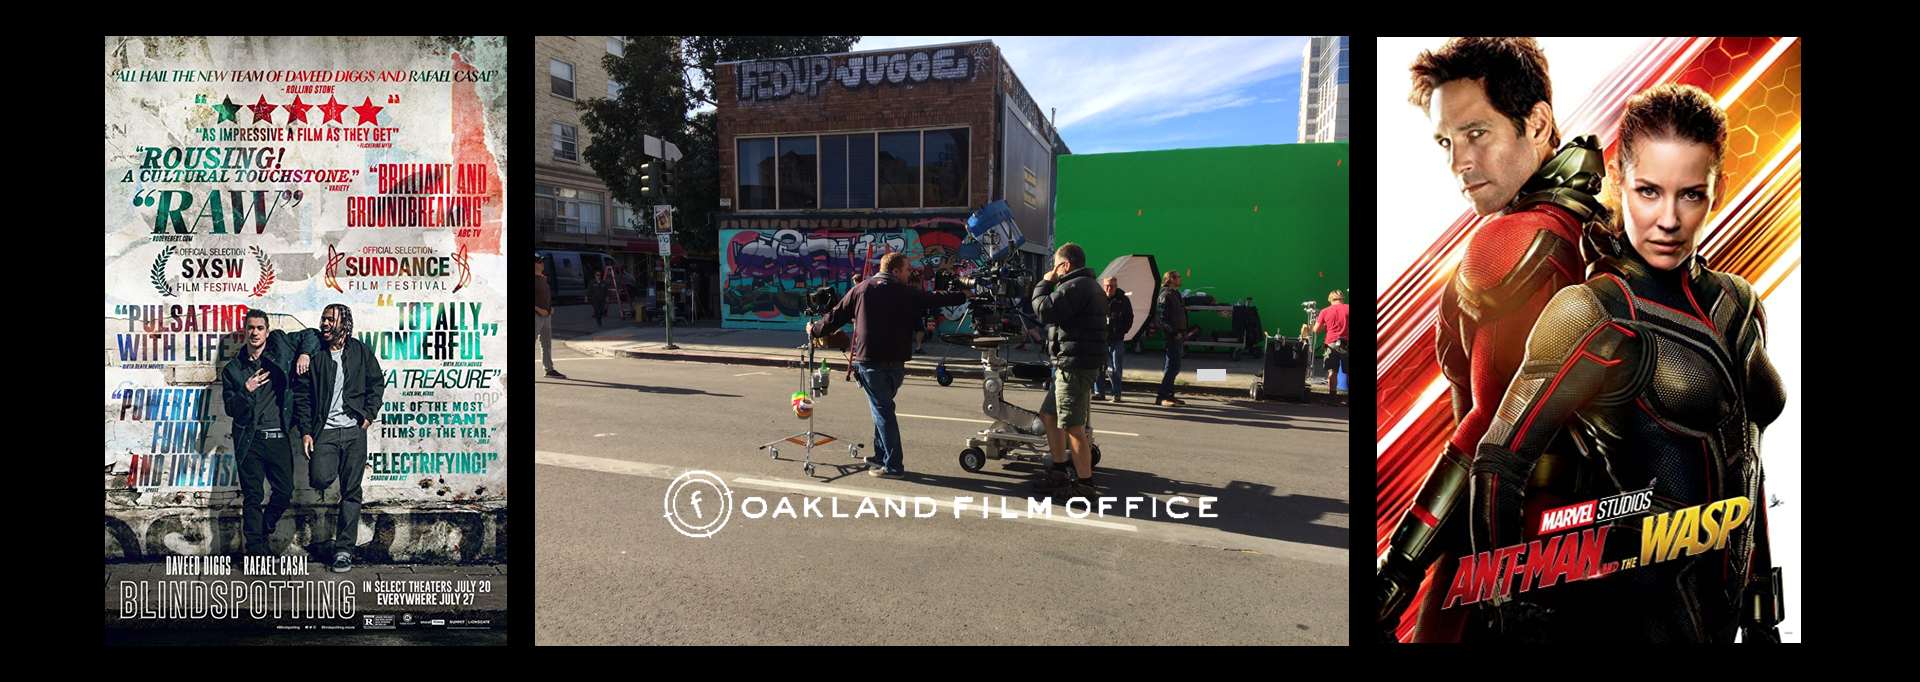 Blindspotting Oakland City street film shoot and Antman 2 posters Oakland Film Office website page header collage